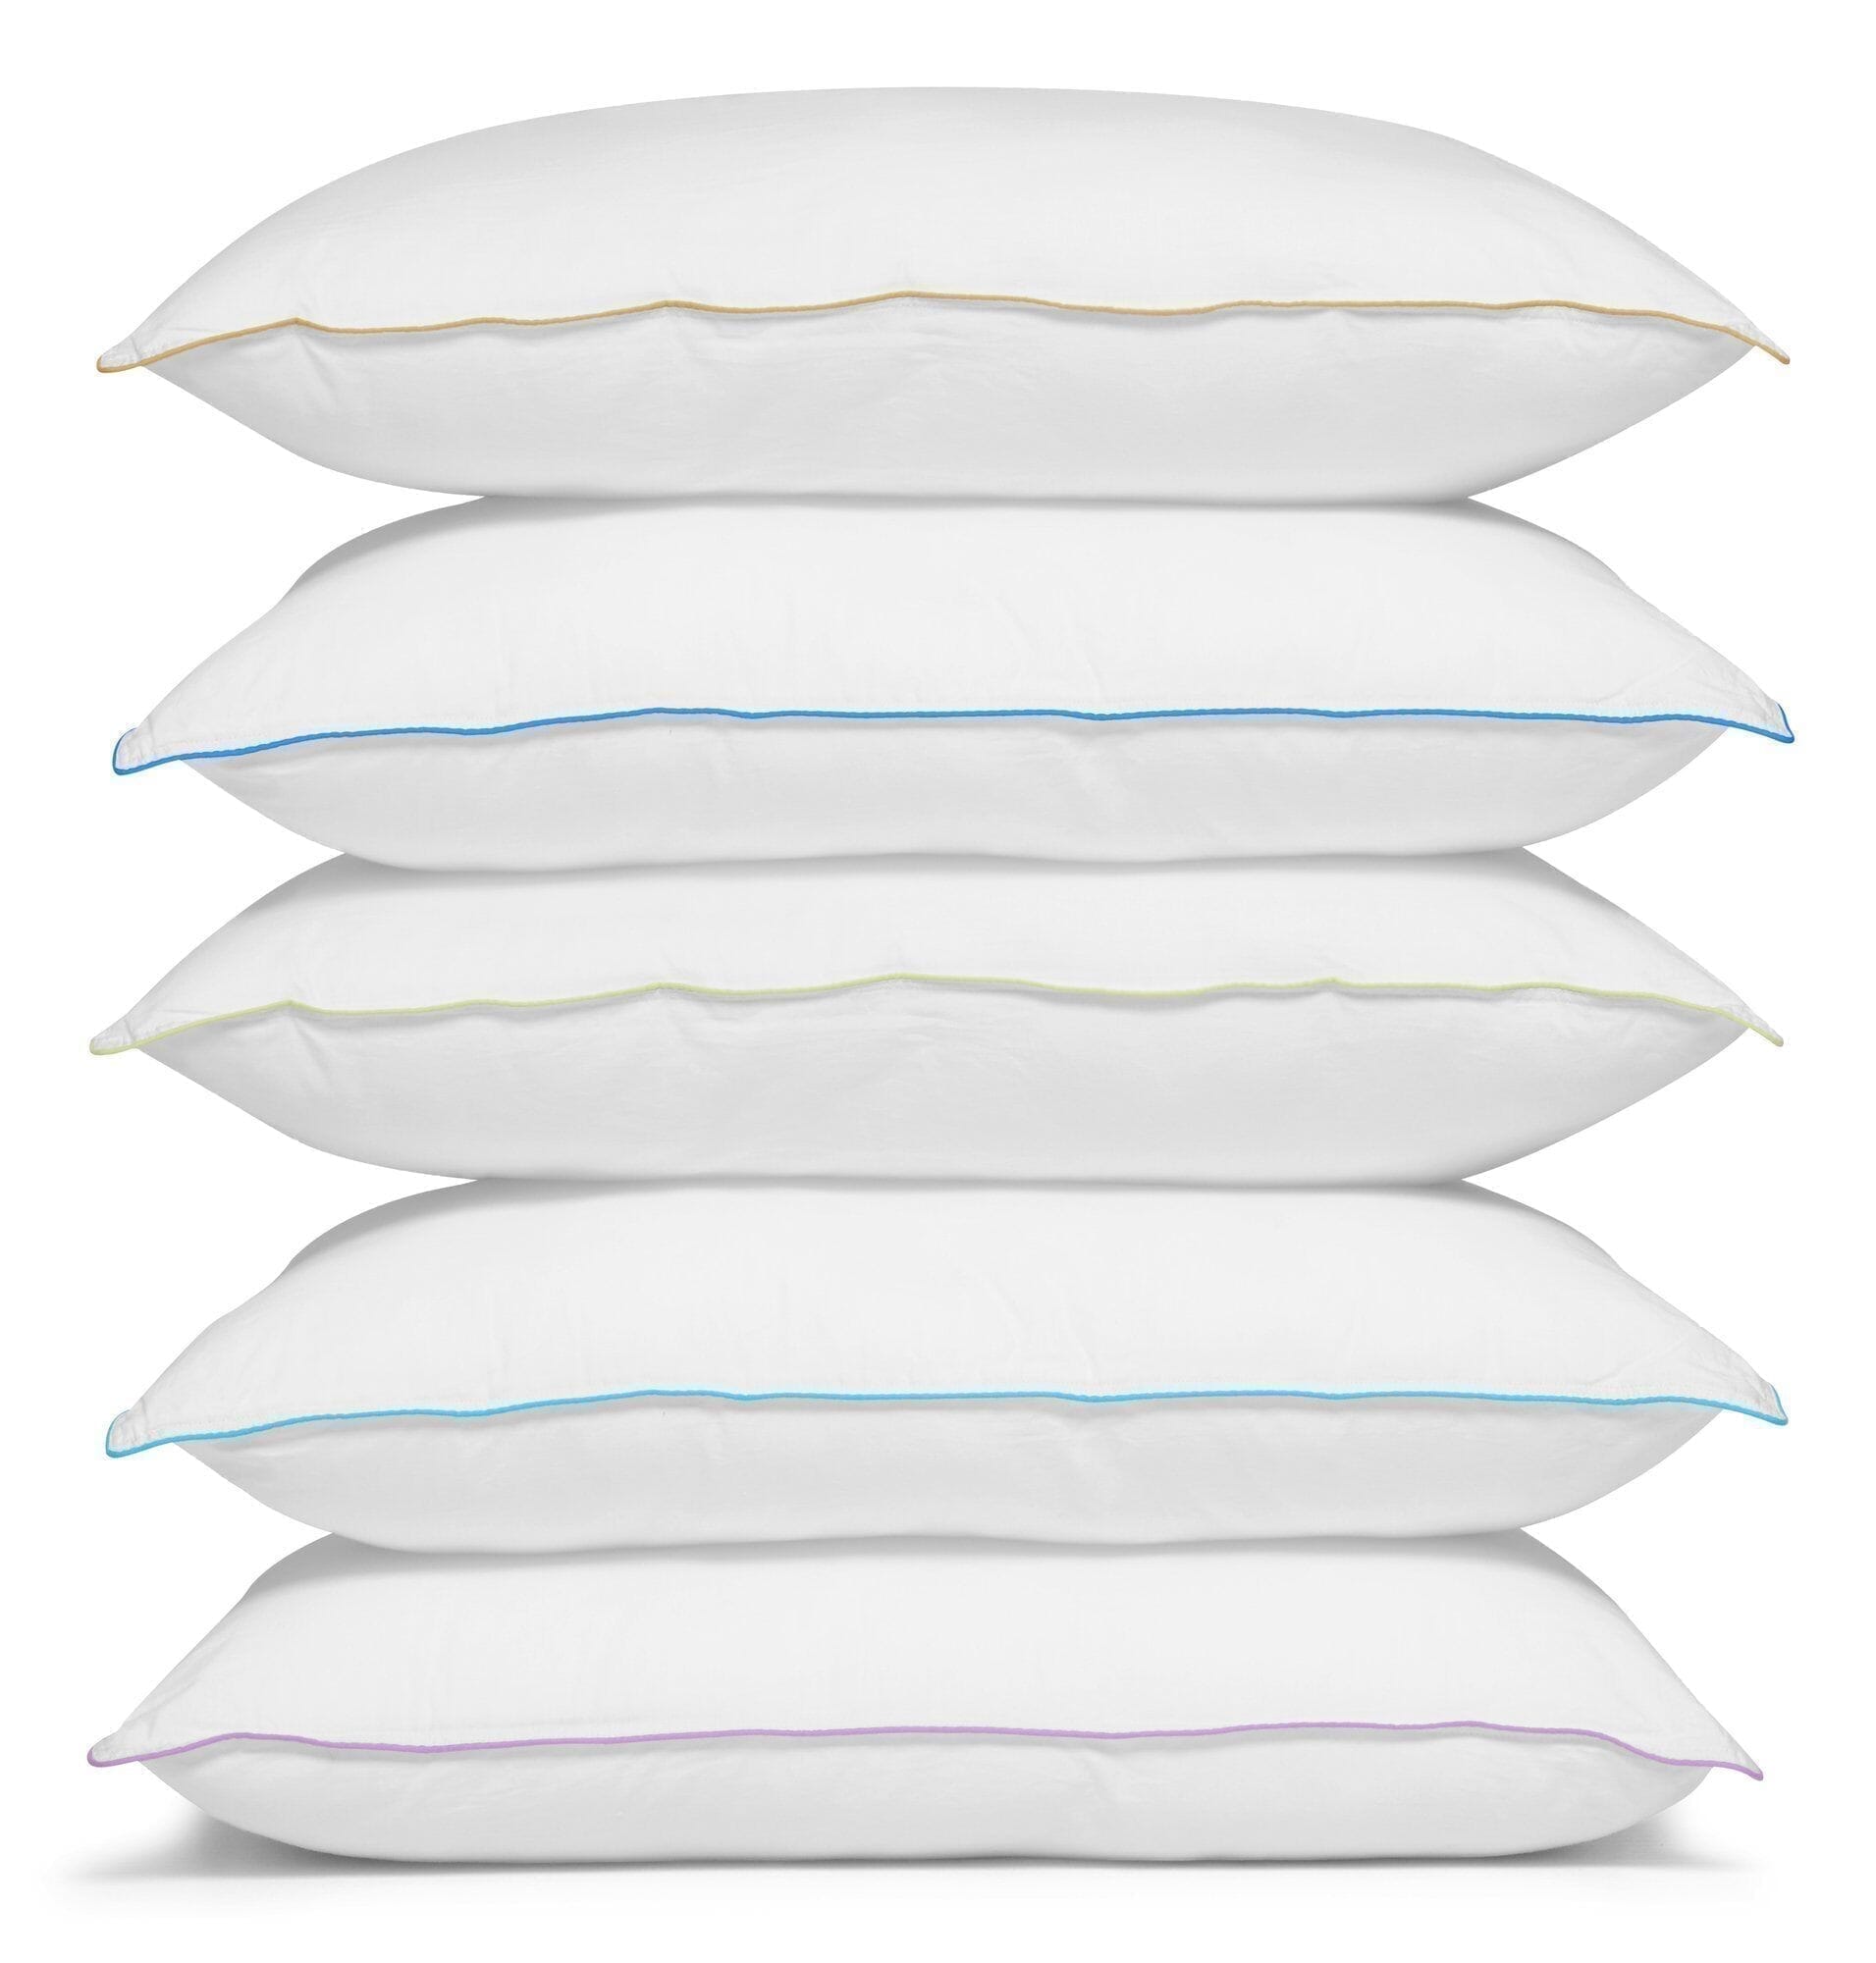 Best Pillows - PlushBeds Buying Guide - PlushBeds